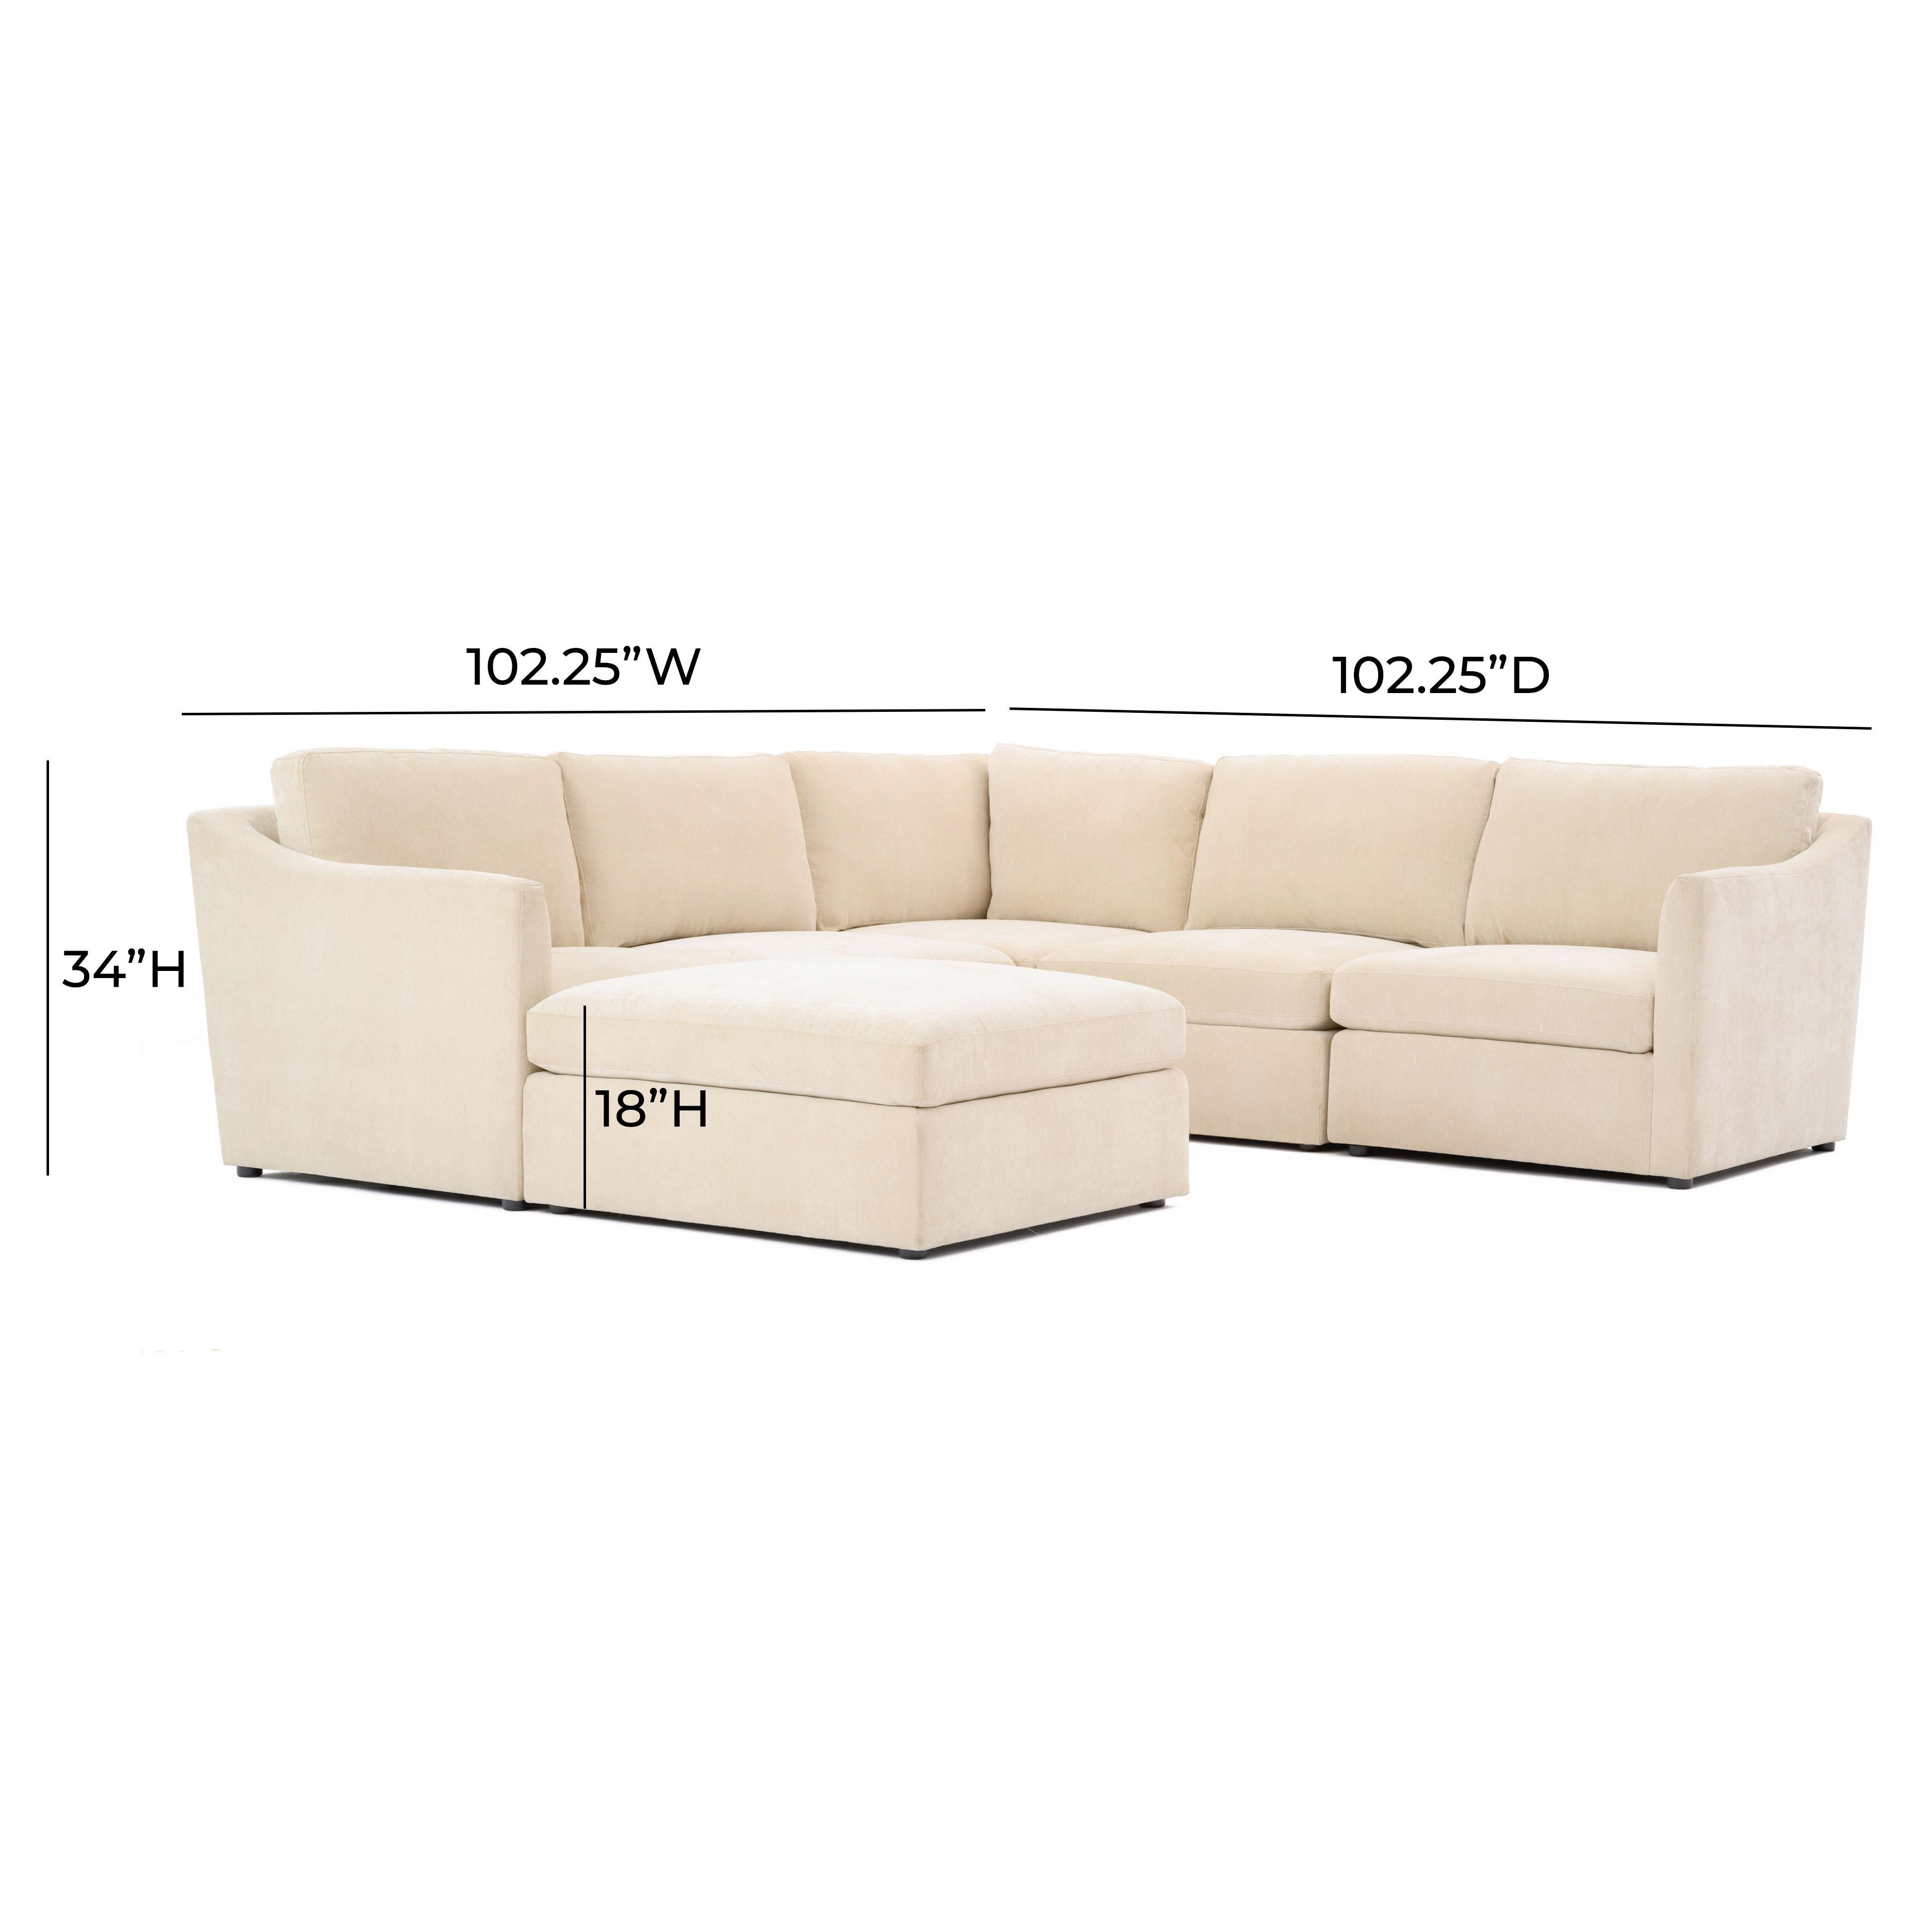 Aiden Beige Modular Chaise Sectional - Image 5